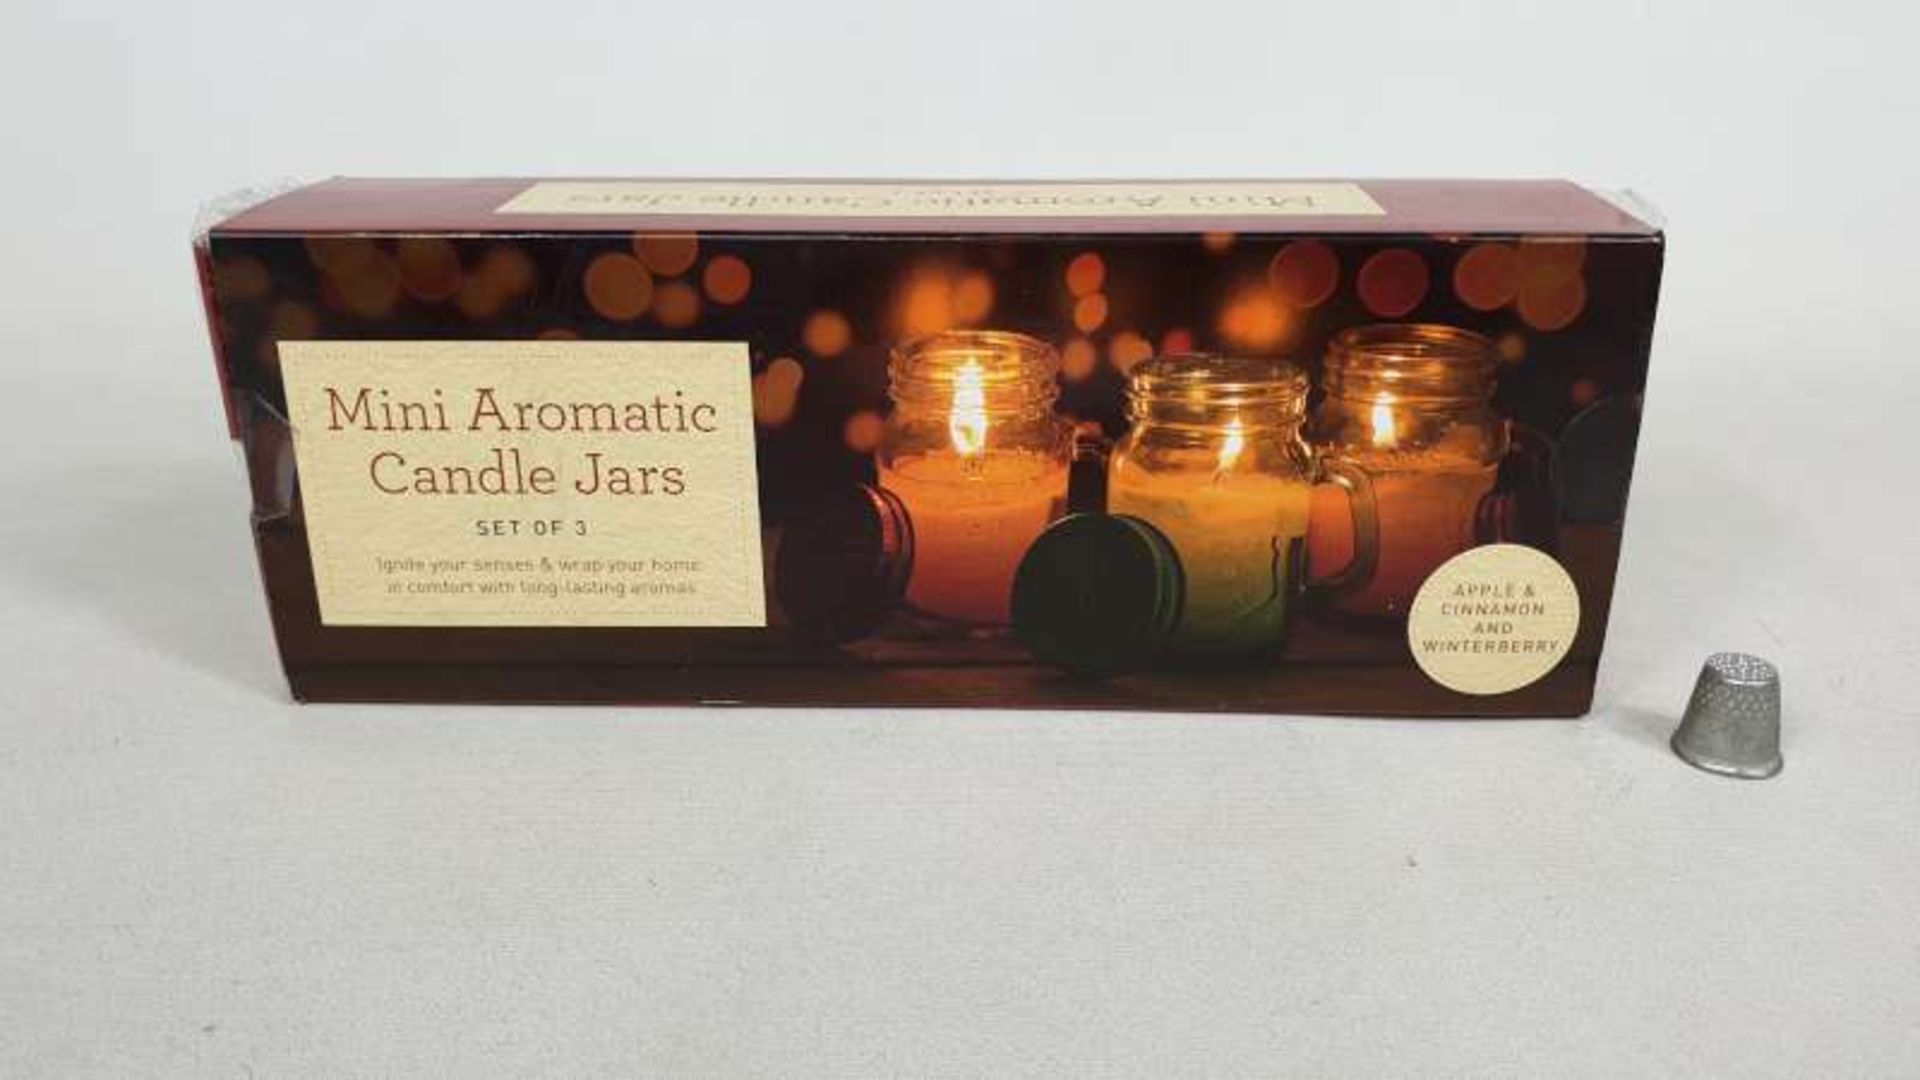 48 X SETS OF 3 MINI AROMATIC CANDLES JARS IN 4 BOXES